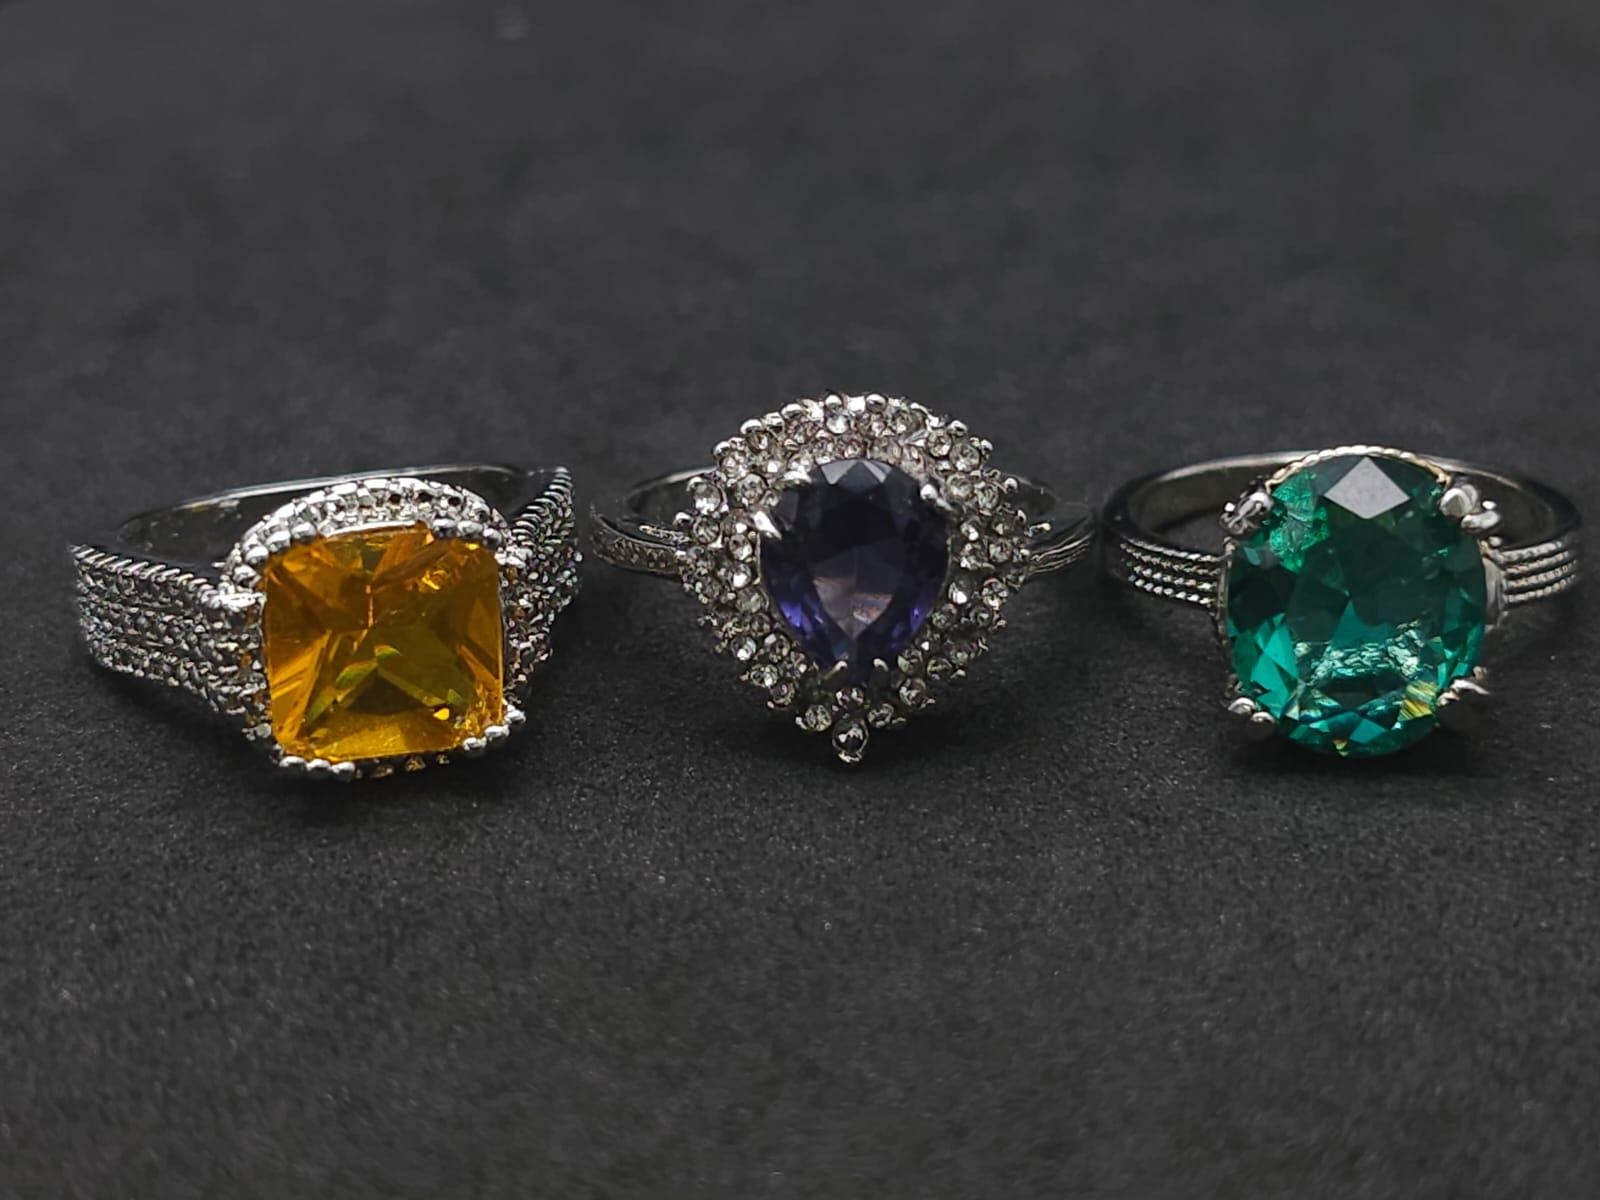 Six dress rings with a variety of gems presented in a miniature chez lounge. Very glamorous! - Image 7 of 12